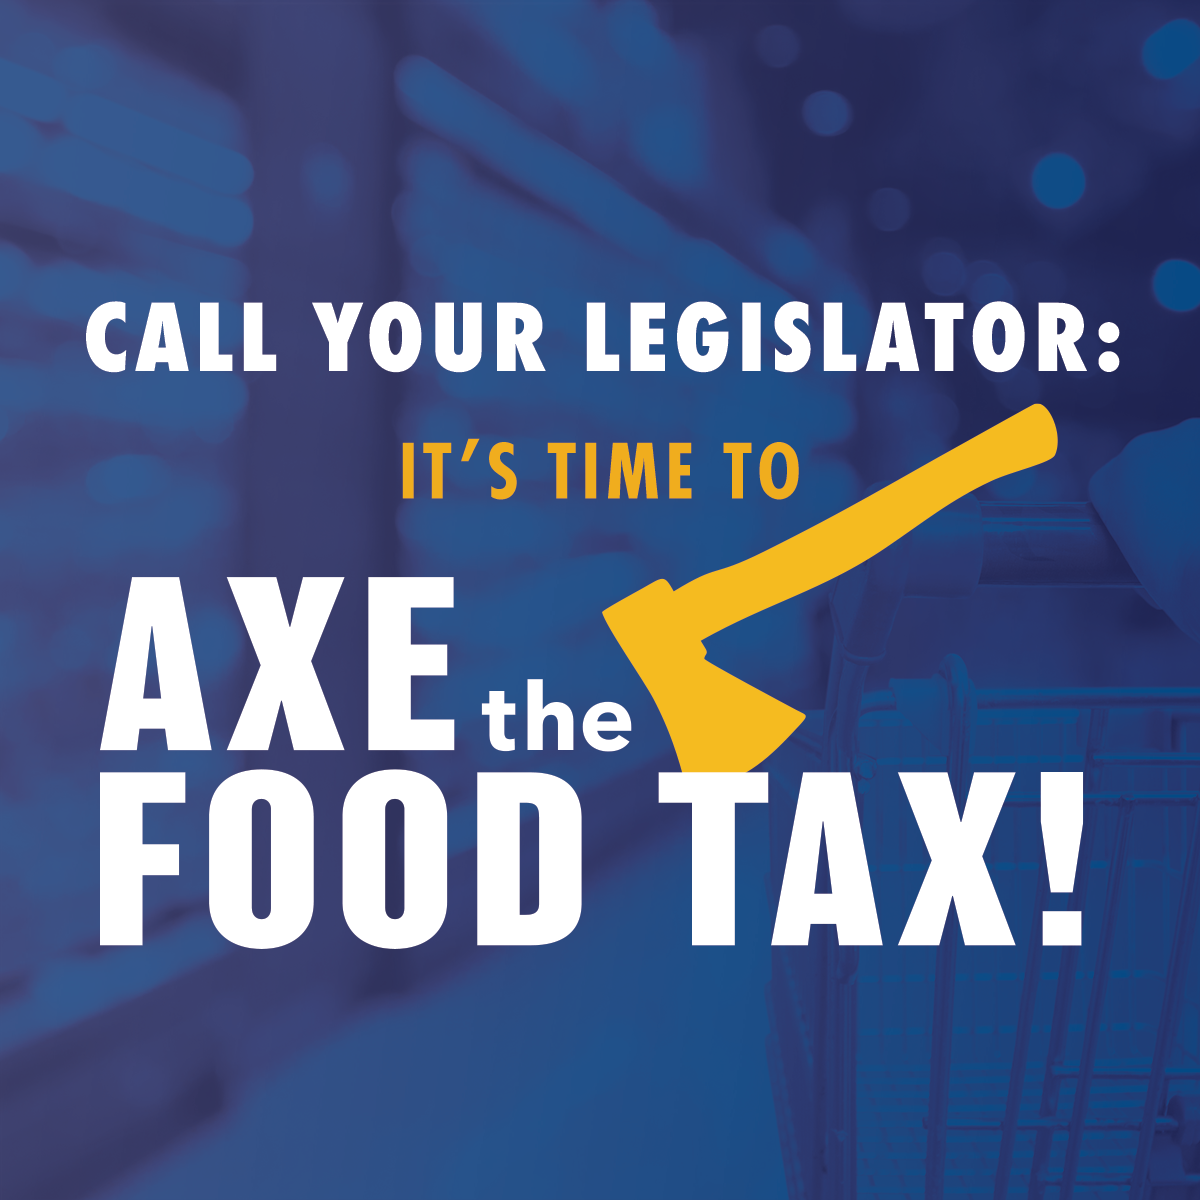 Axe the Food Tax Newsletter: April 13, 2022